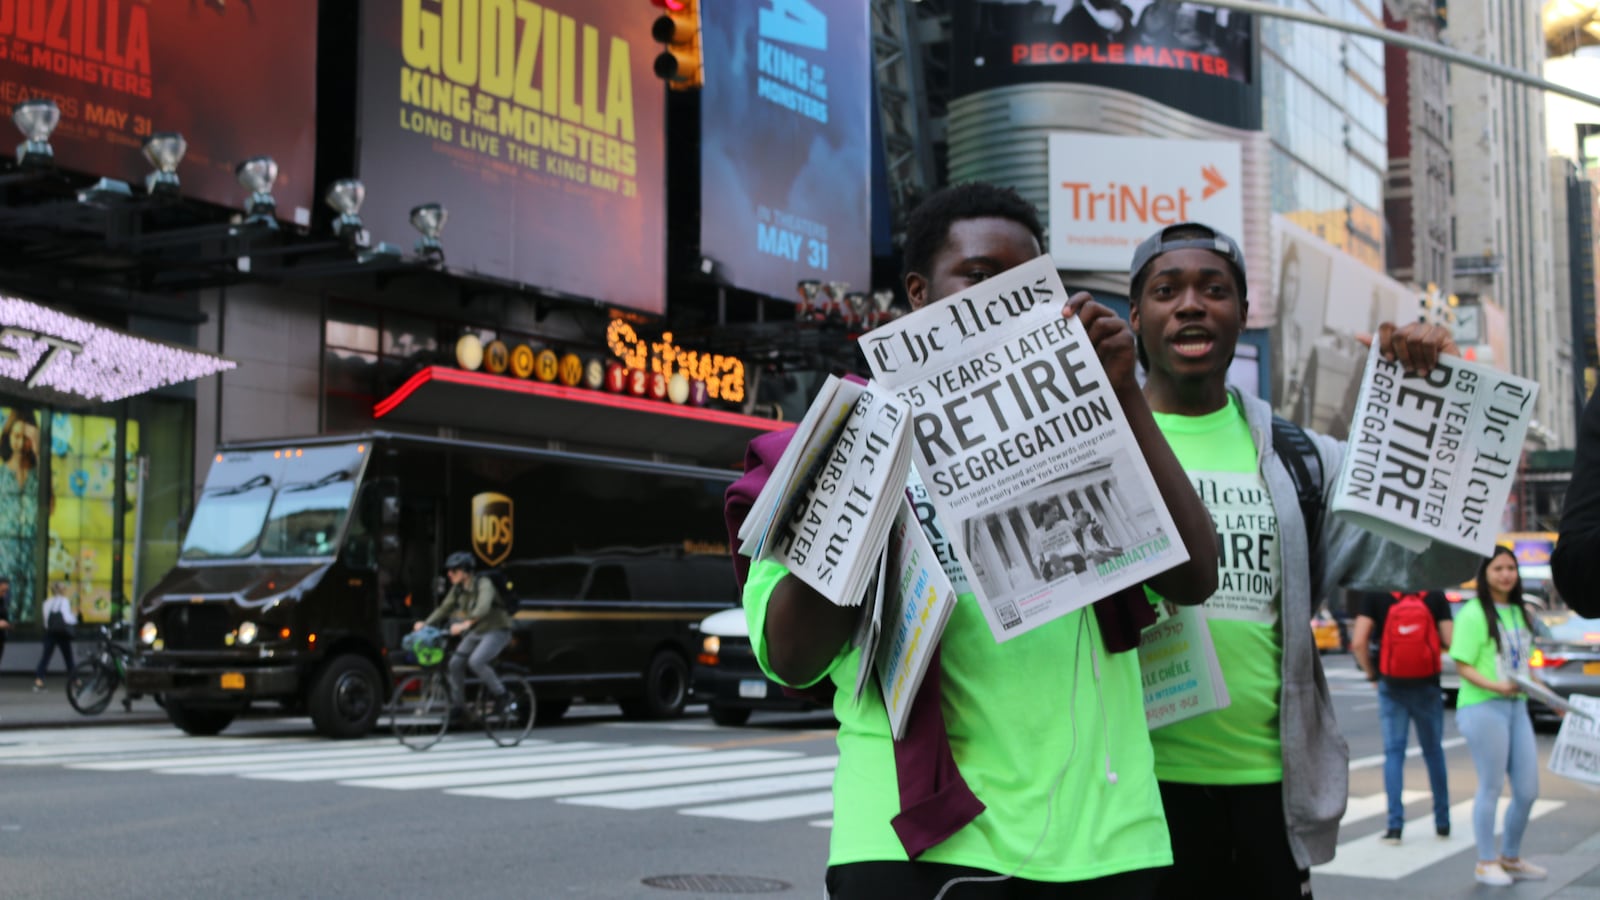 Teens with the advocacy group IntegateNYC took to Times Square to hand out newspapers filled with students' own stories about school segregation to mark the anniversary of Brown v. Board of Education. The group is one of many that provided input for the School Diversity Advisory Group recommendations.